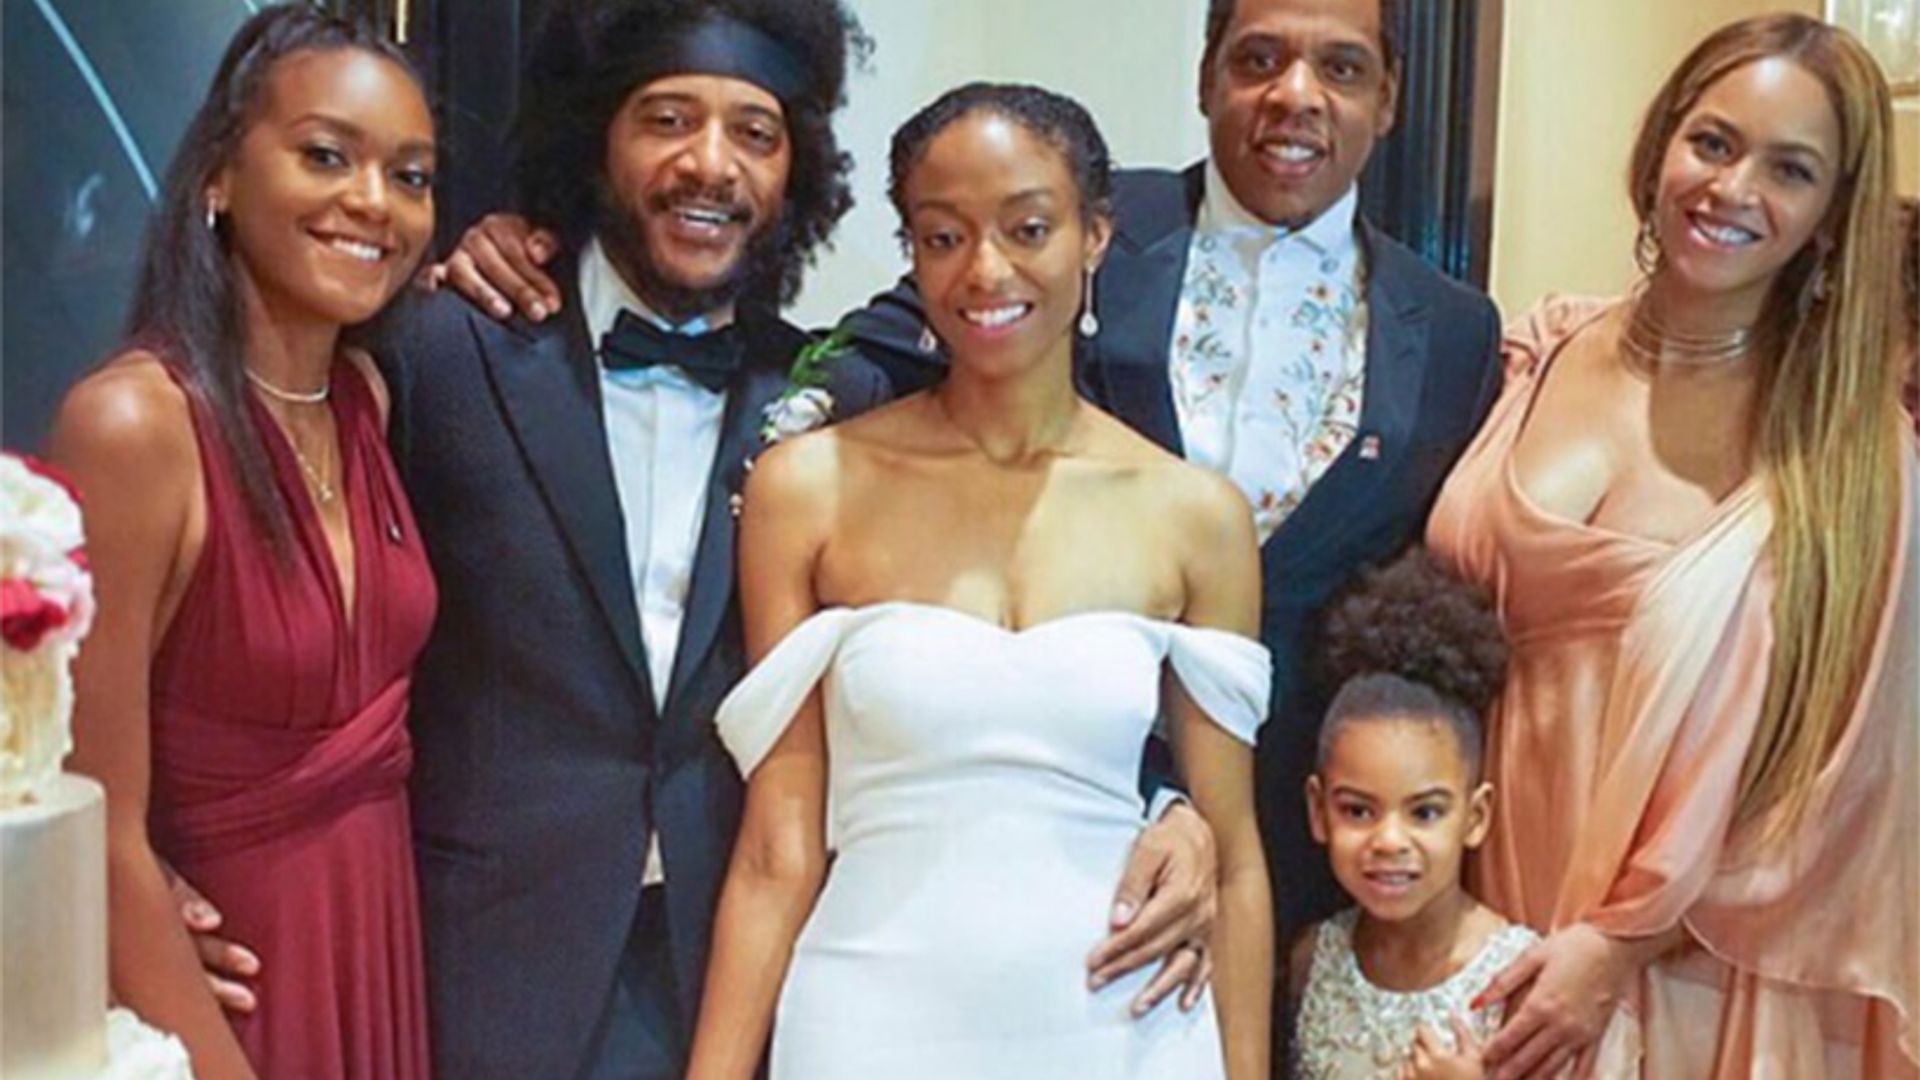 Blue Ivy Carter dazzles in adorable £3,800 Mischka Aoki gown